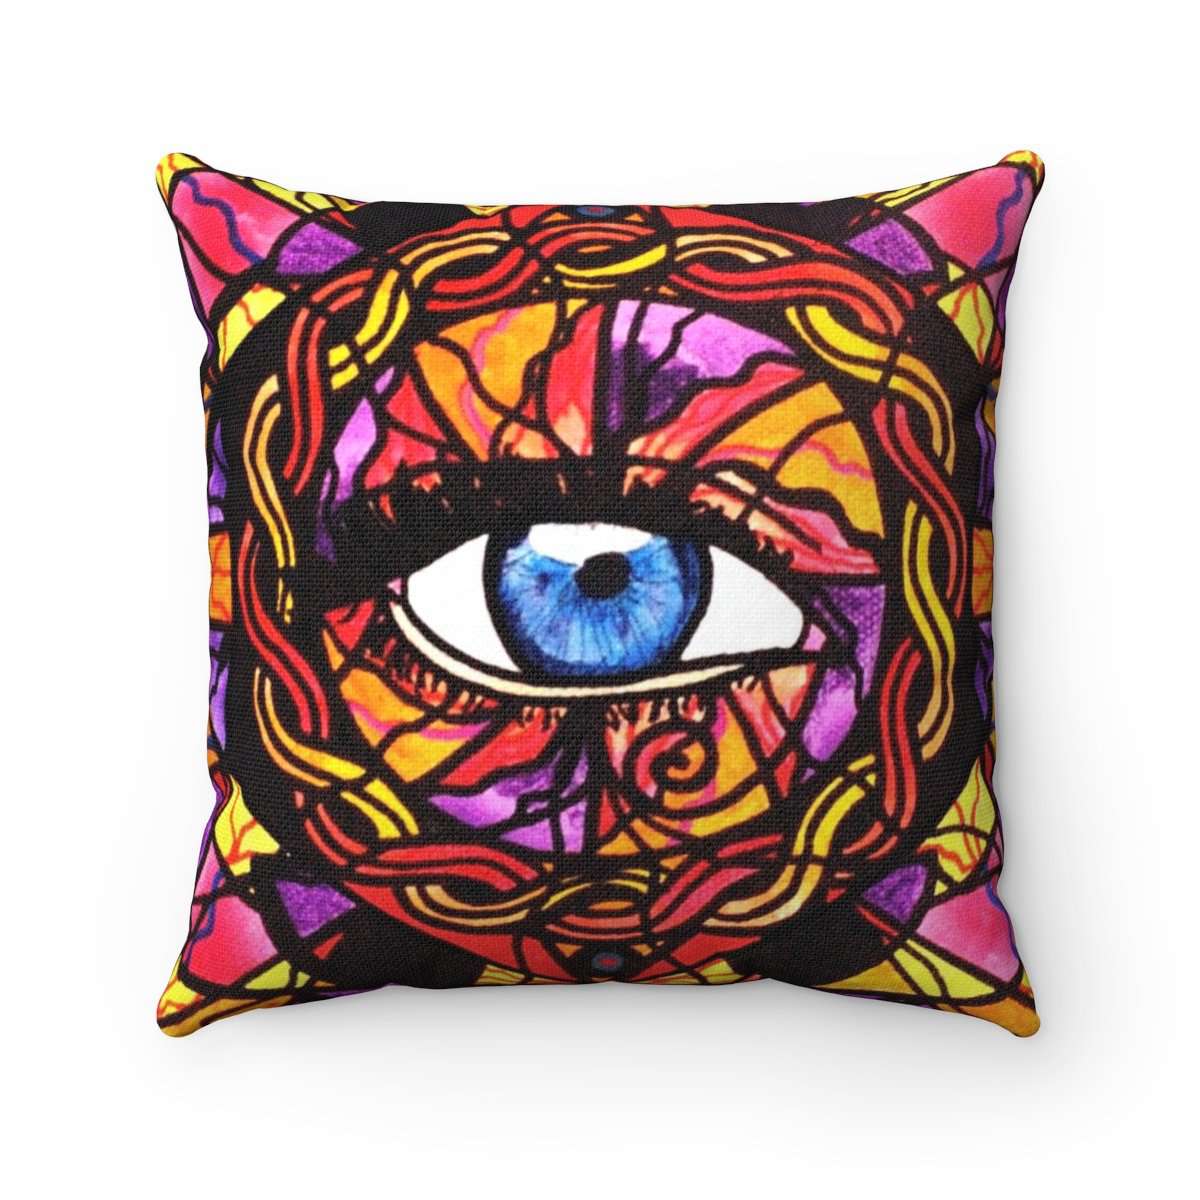 shop-for-confident-self-expression-spun-polyester-square-pillow-online-hot-sale_1.jpg